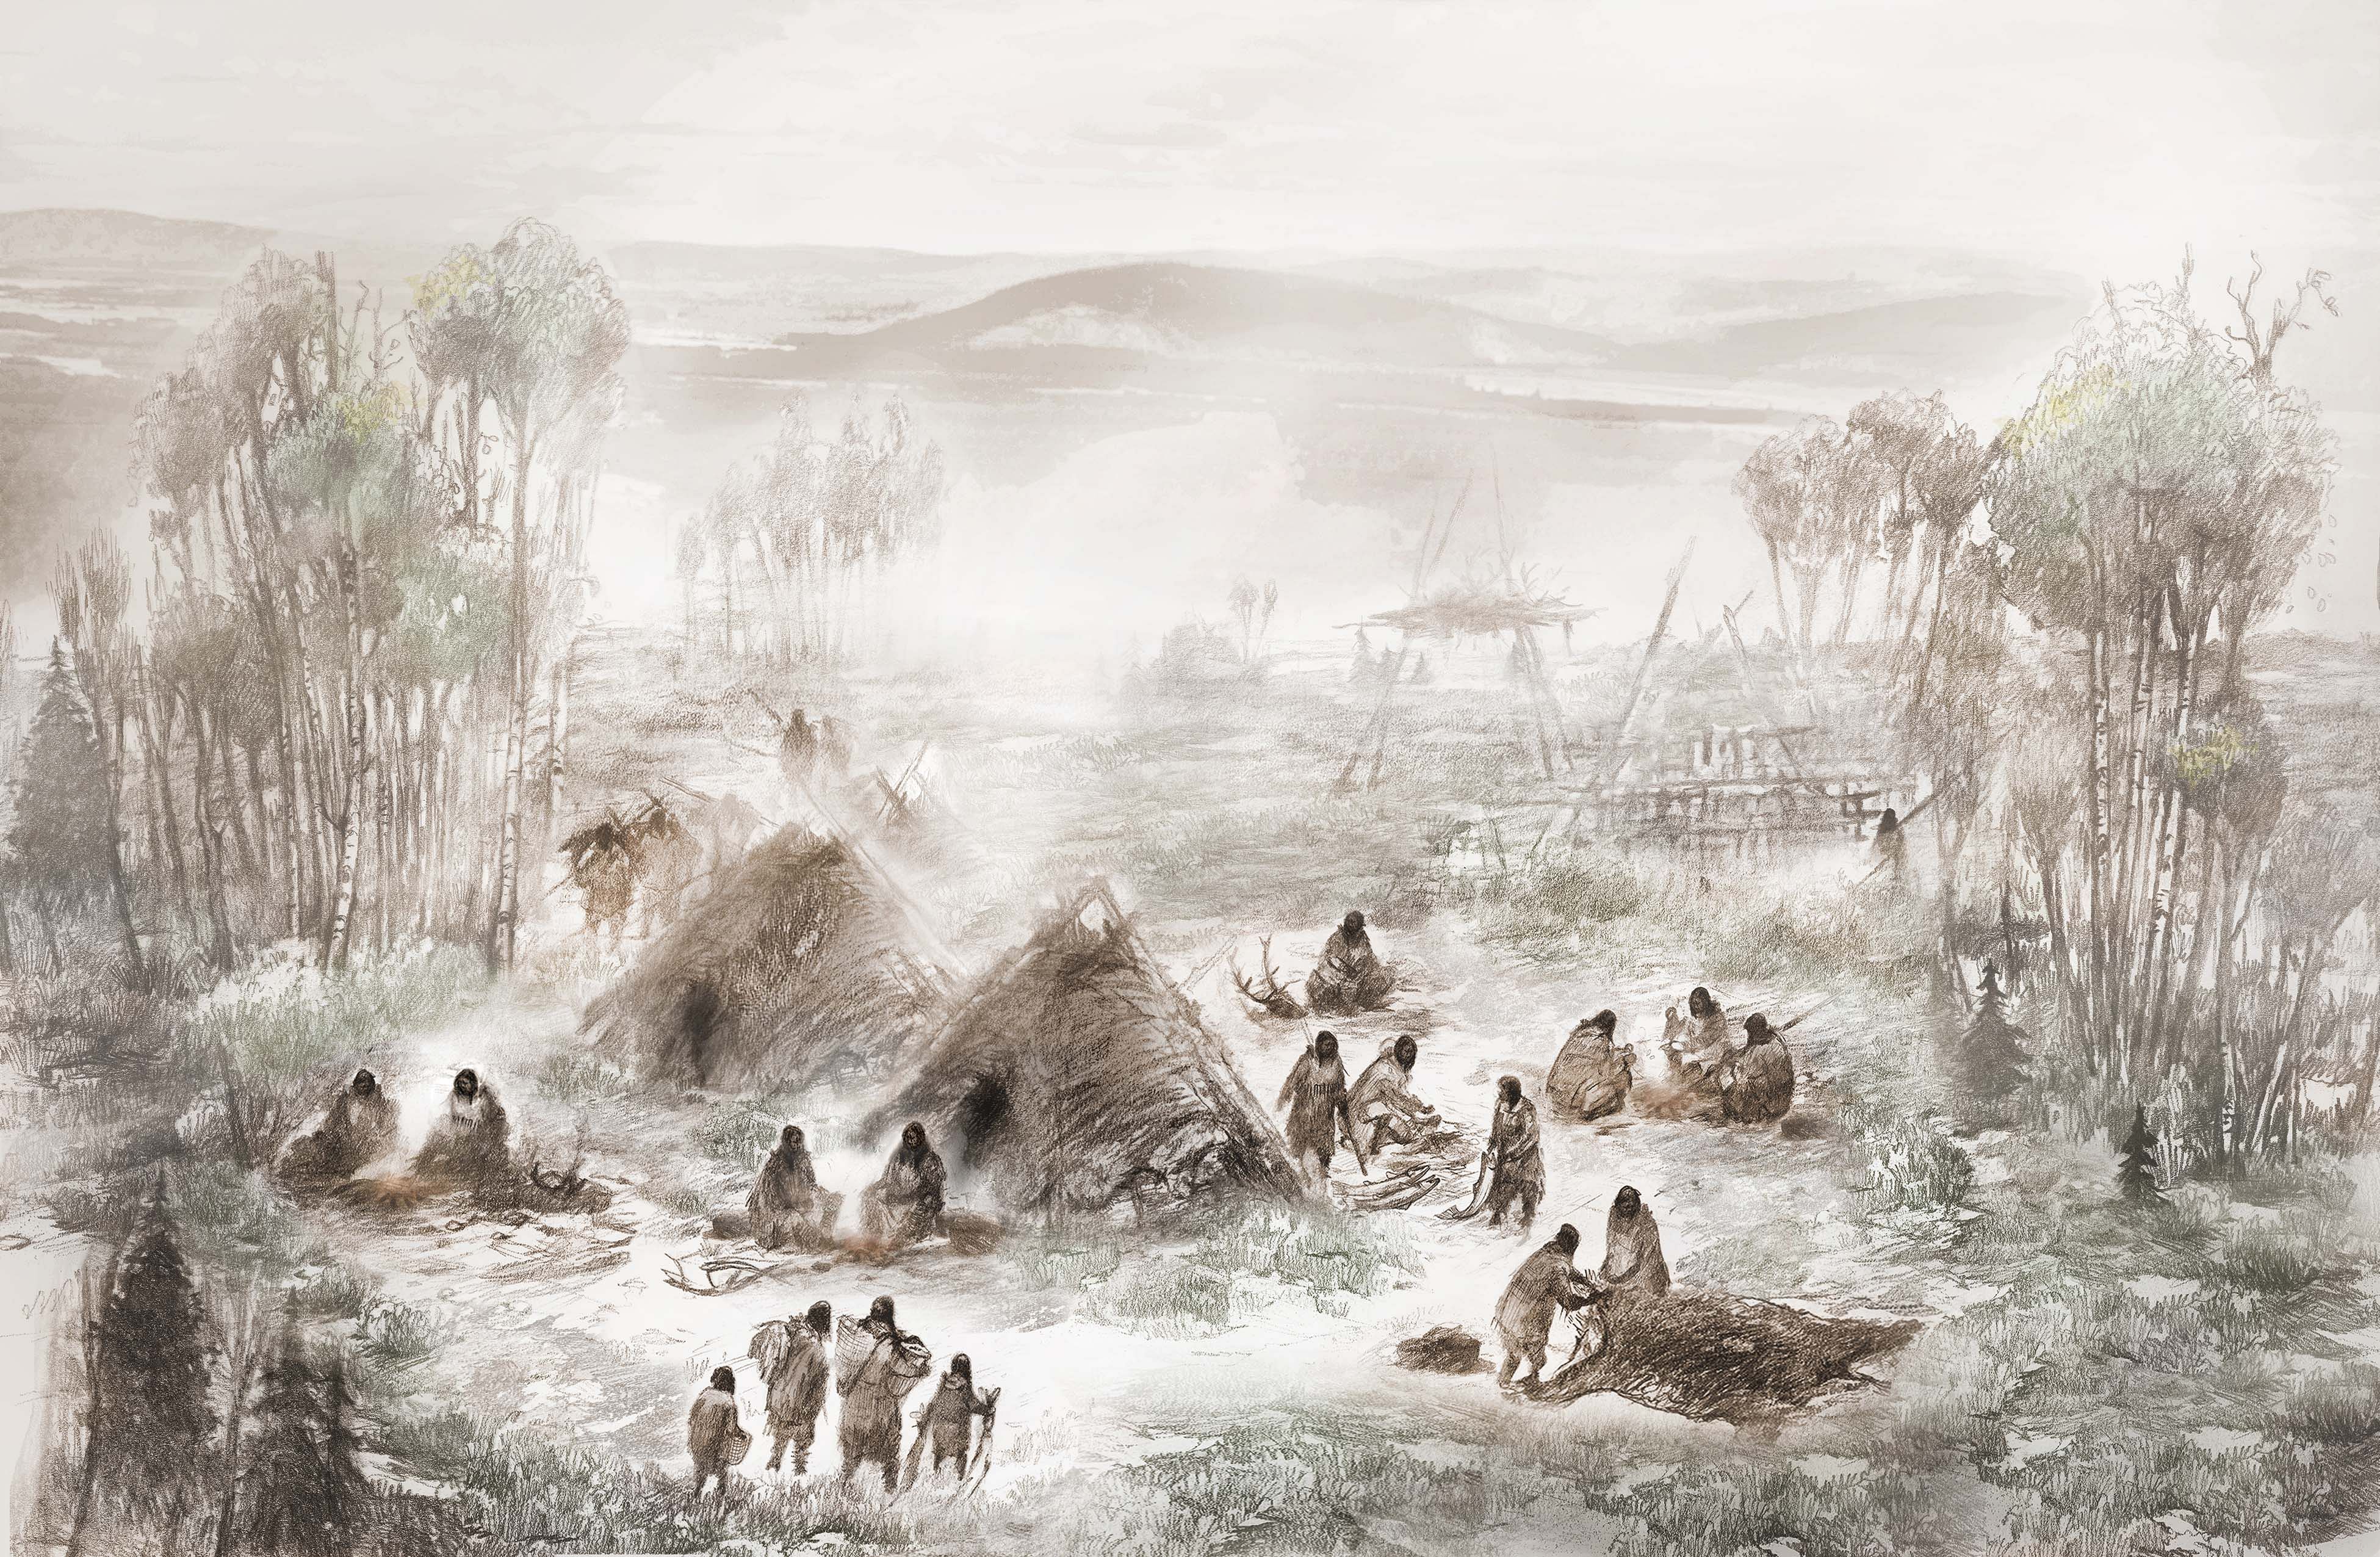  Reconstruction of Upward Sun River residential camp. The infants were buried within the structure in the foreground.  Illustration by Eric S. Carlson in collaboration with Ben A. Potter.